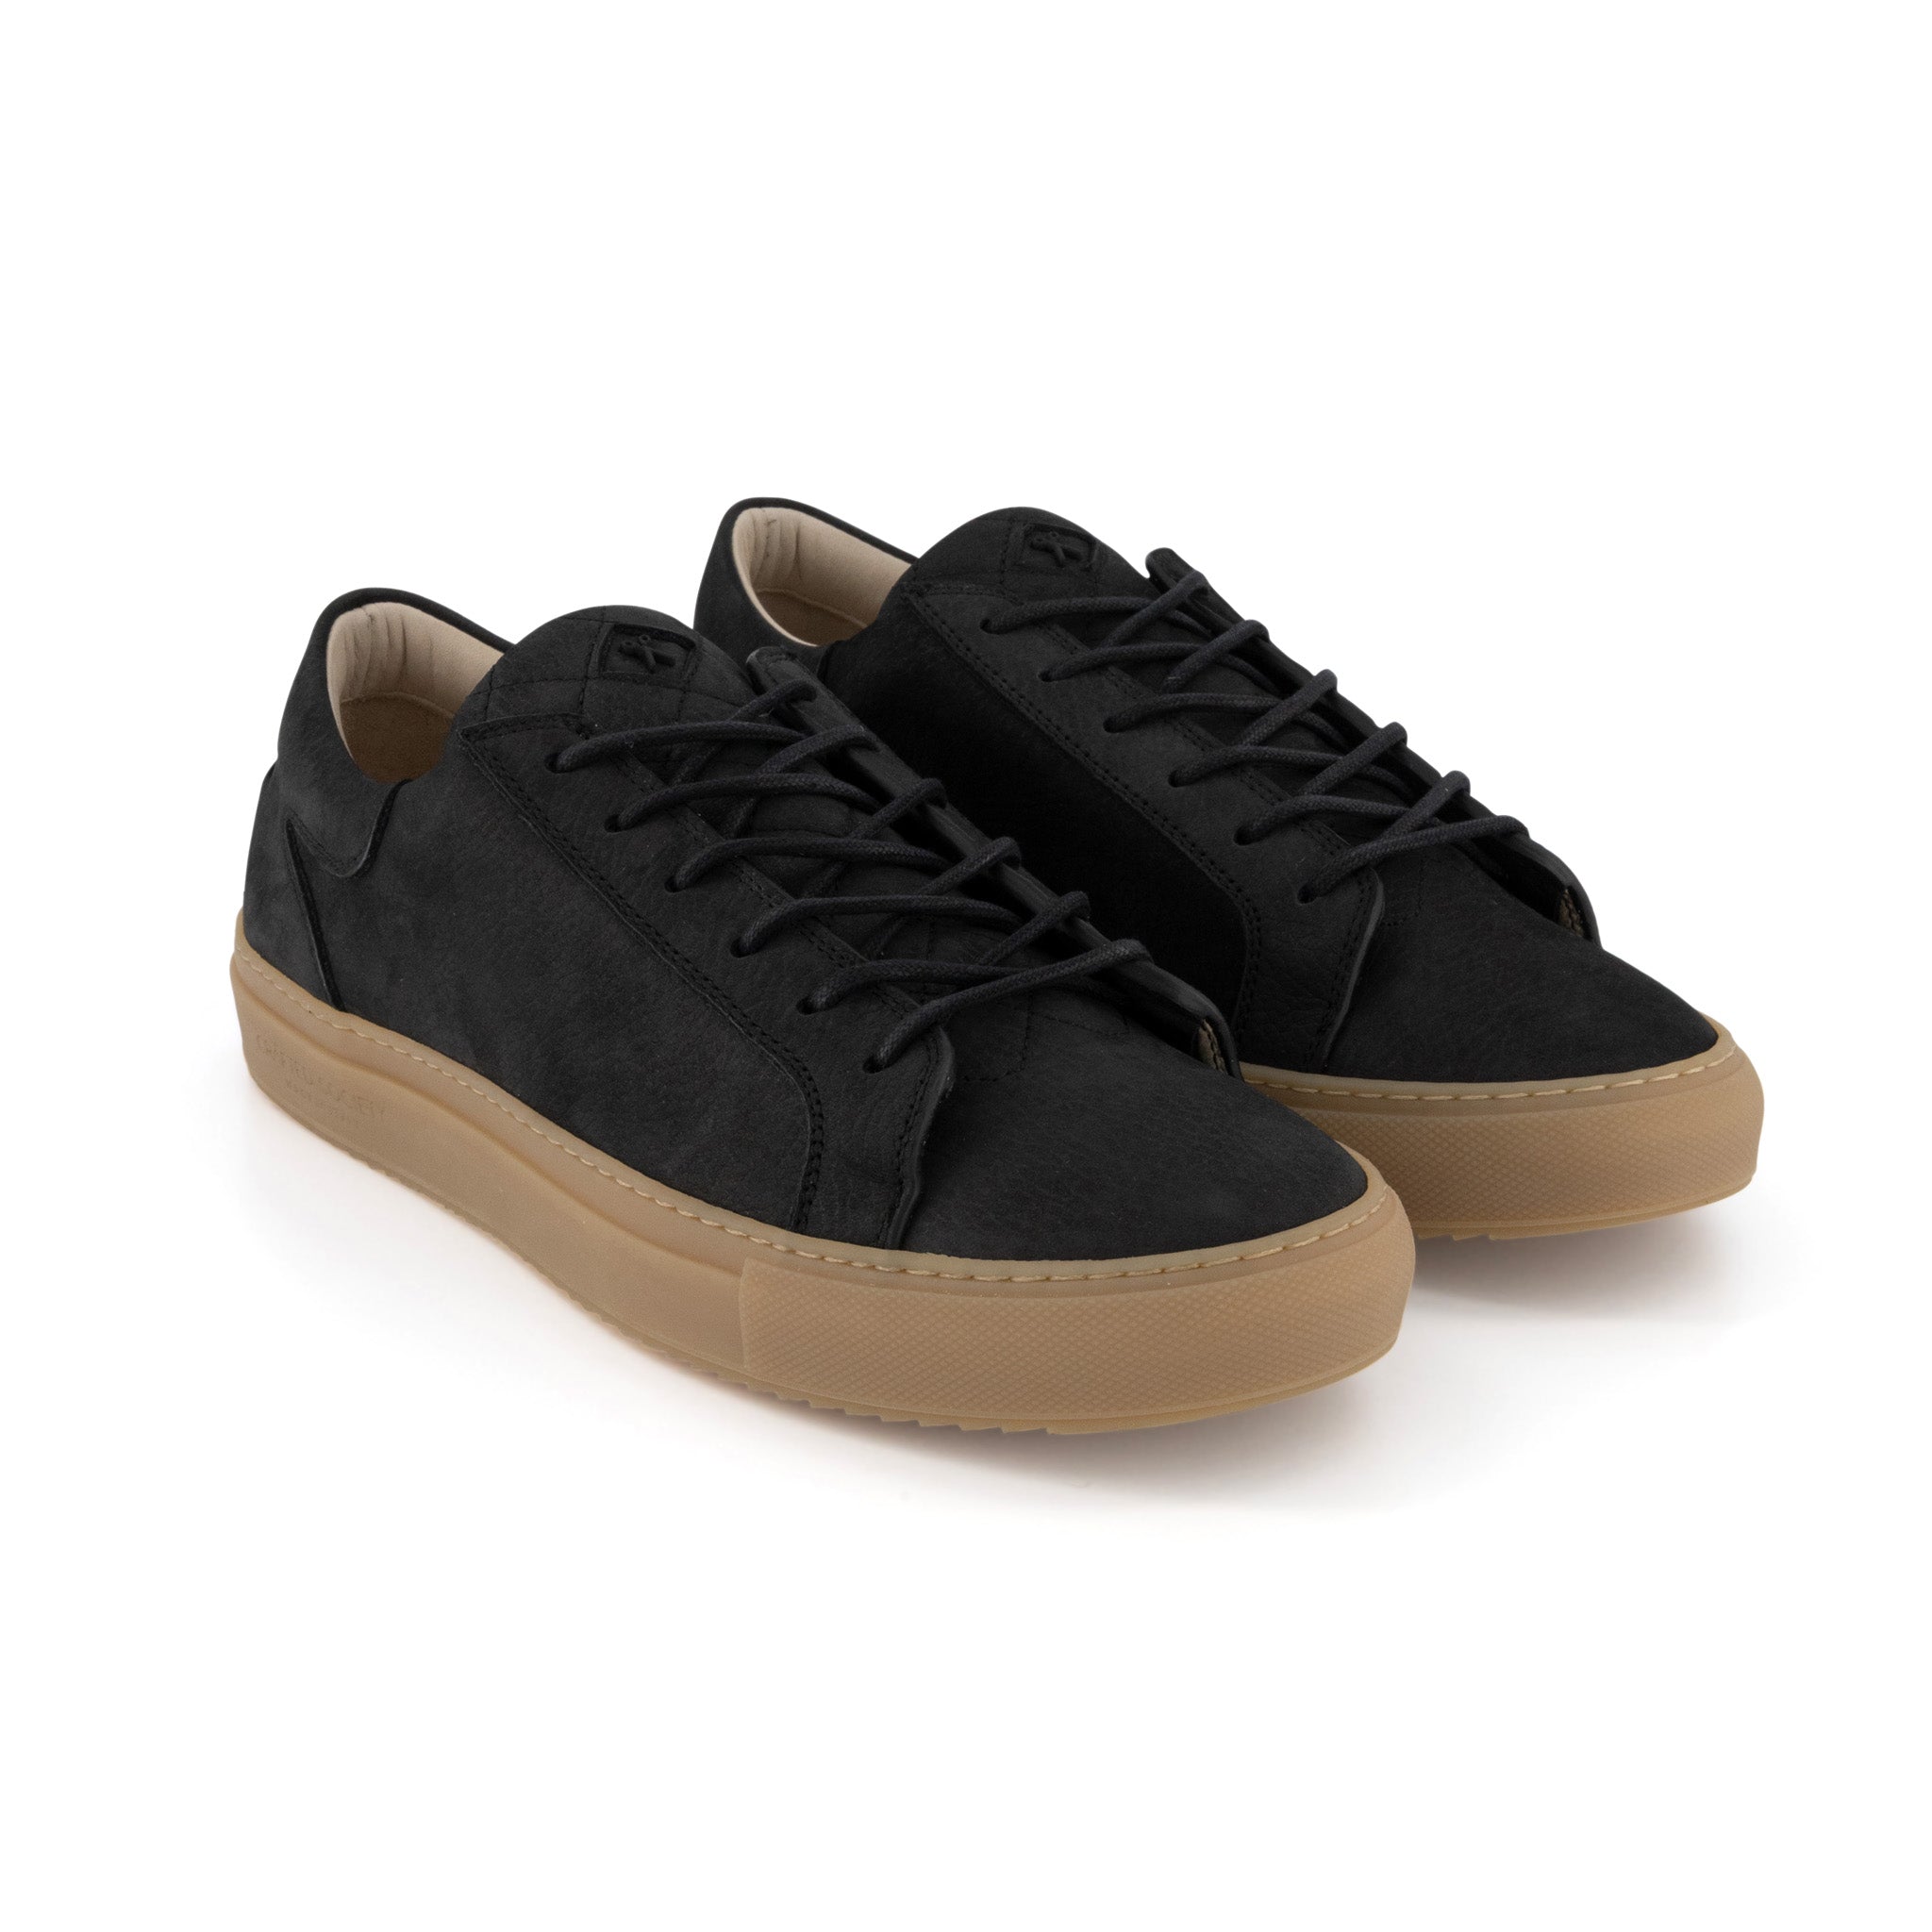 Mario Low Refined Sneaker | Black Nubuck | Gum Rubber Outsole | Made in Italy | Size 41